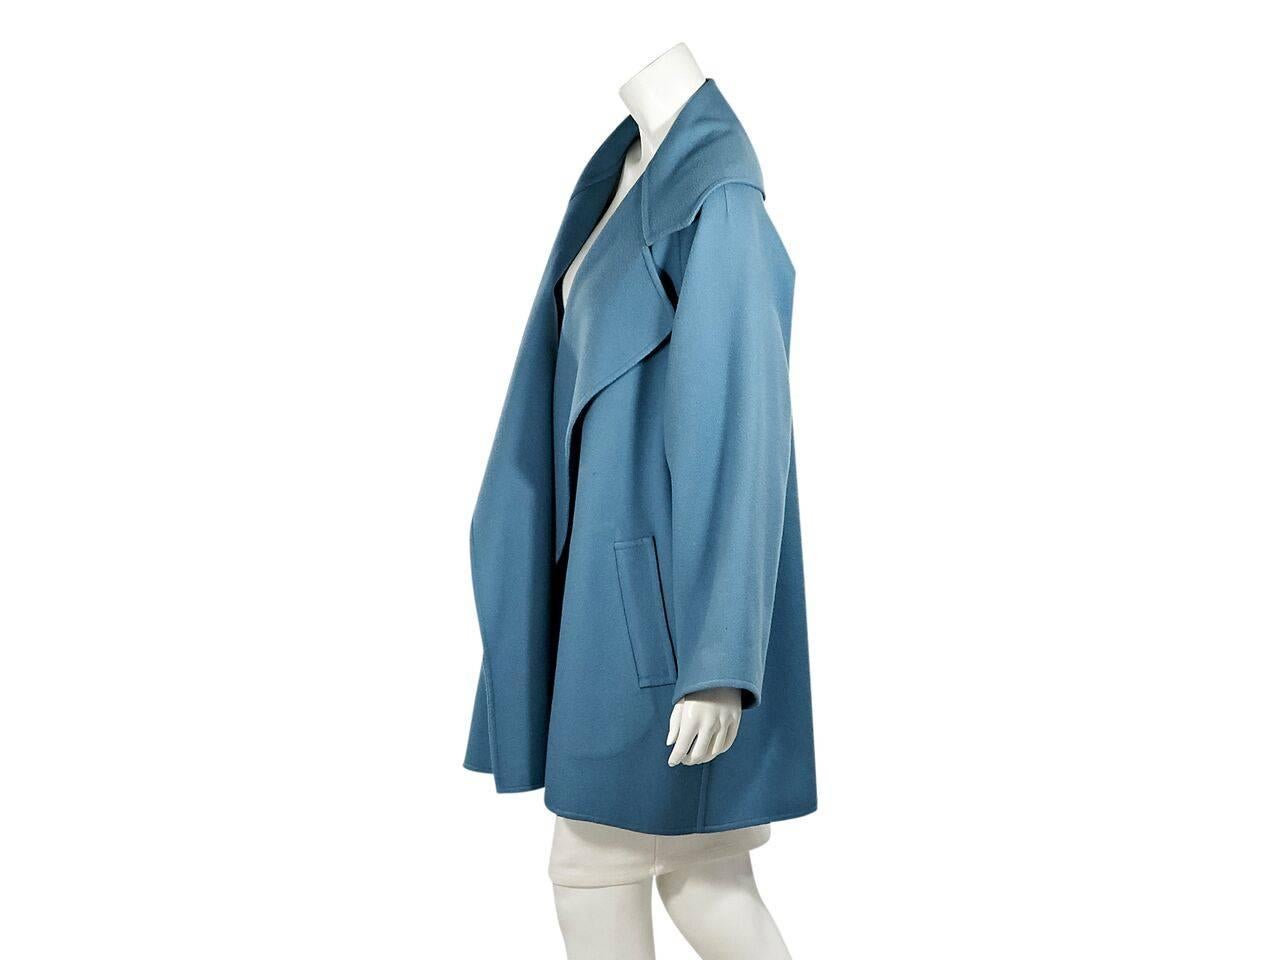 Product details:  Blue wool coat by Salvatore Ferragamo. Notched lapel.  Long sleeves.  Open front.  Waist slide pockets.  
Condition: Pre-owned. Very good.
Est. Retail $ 1,875.00